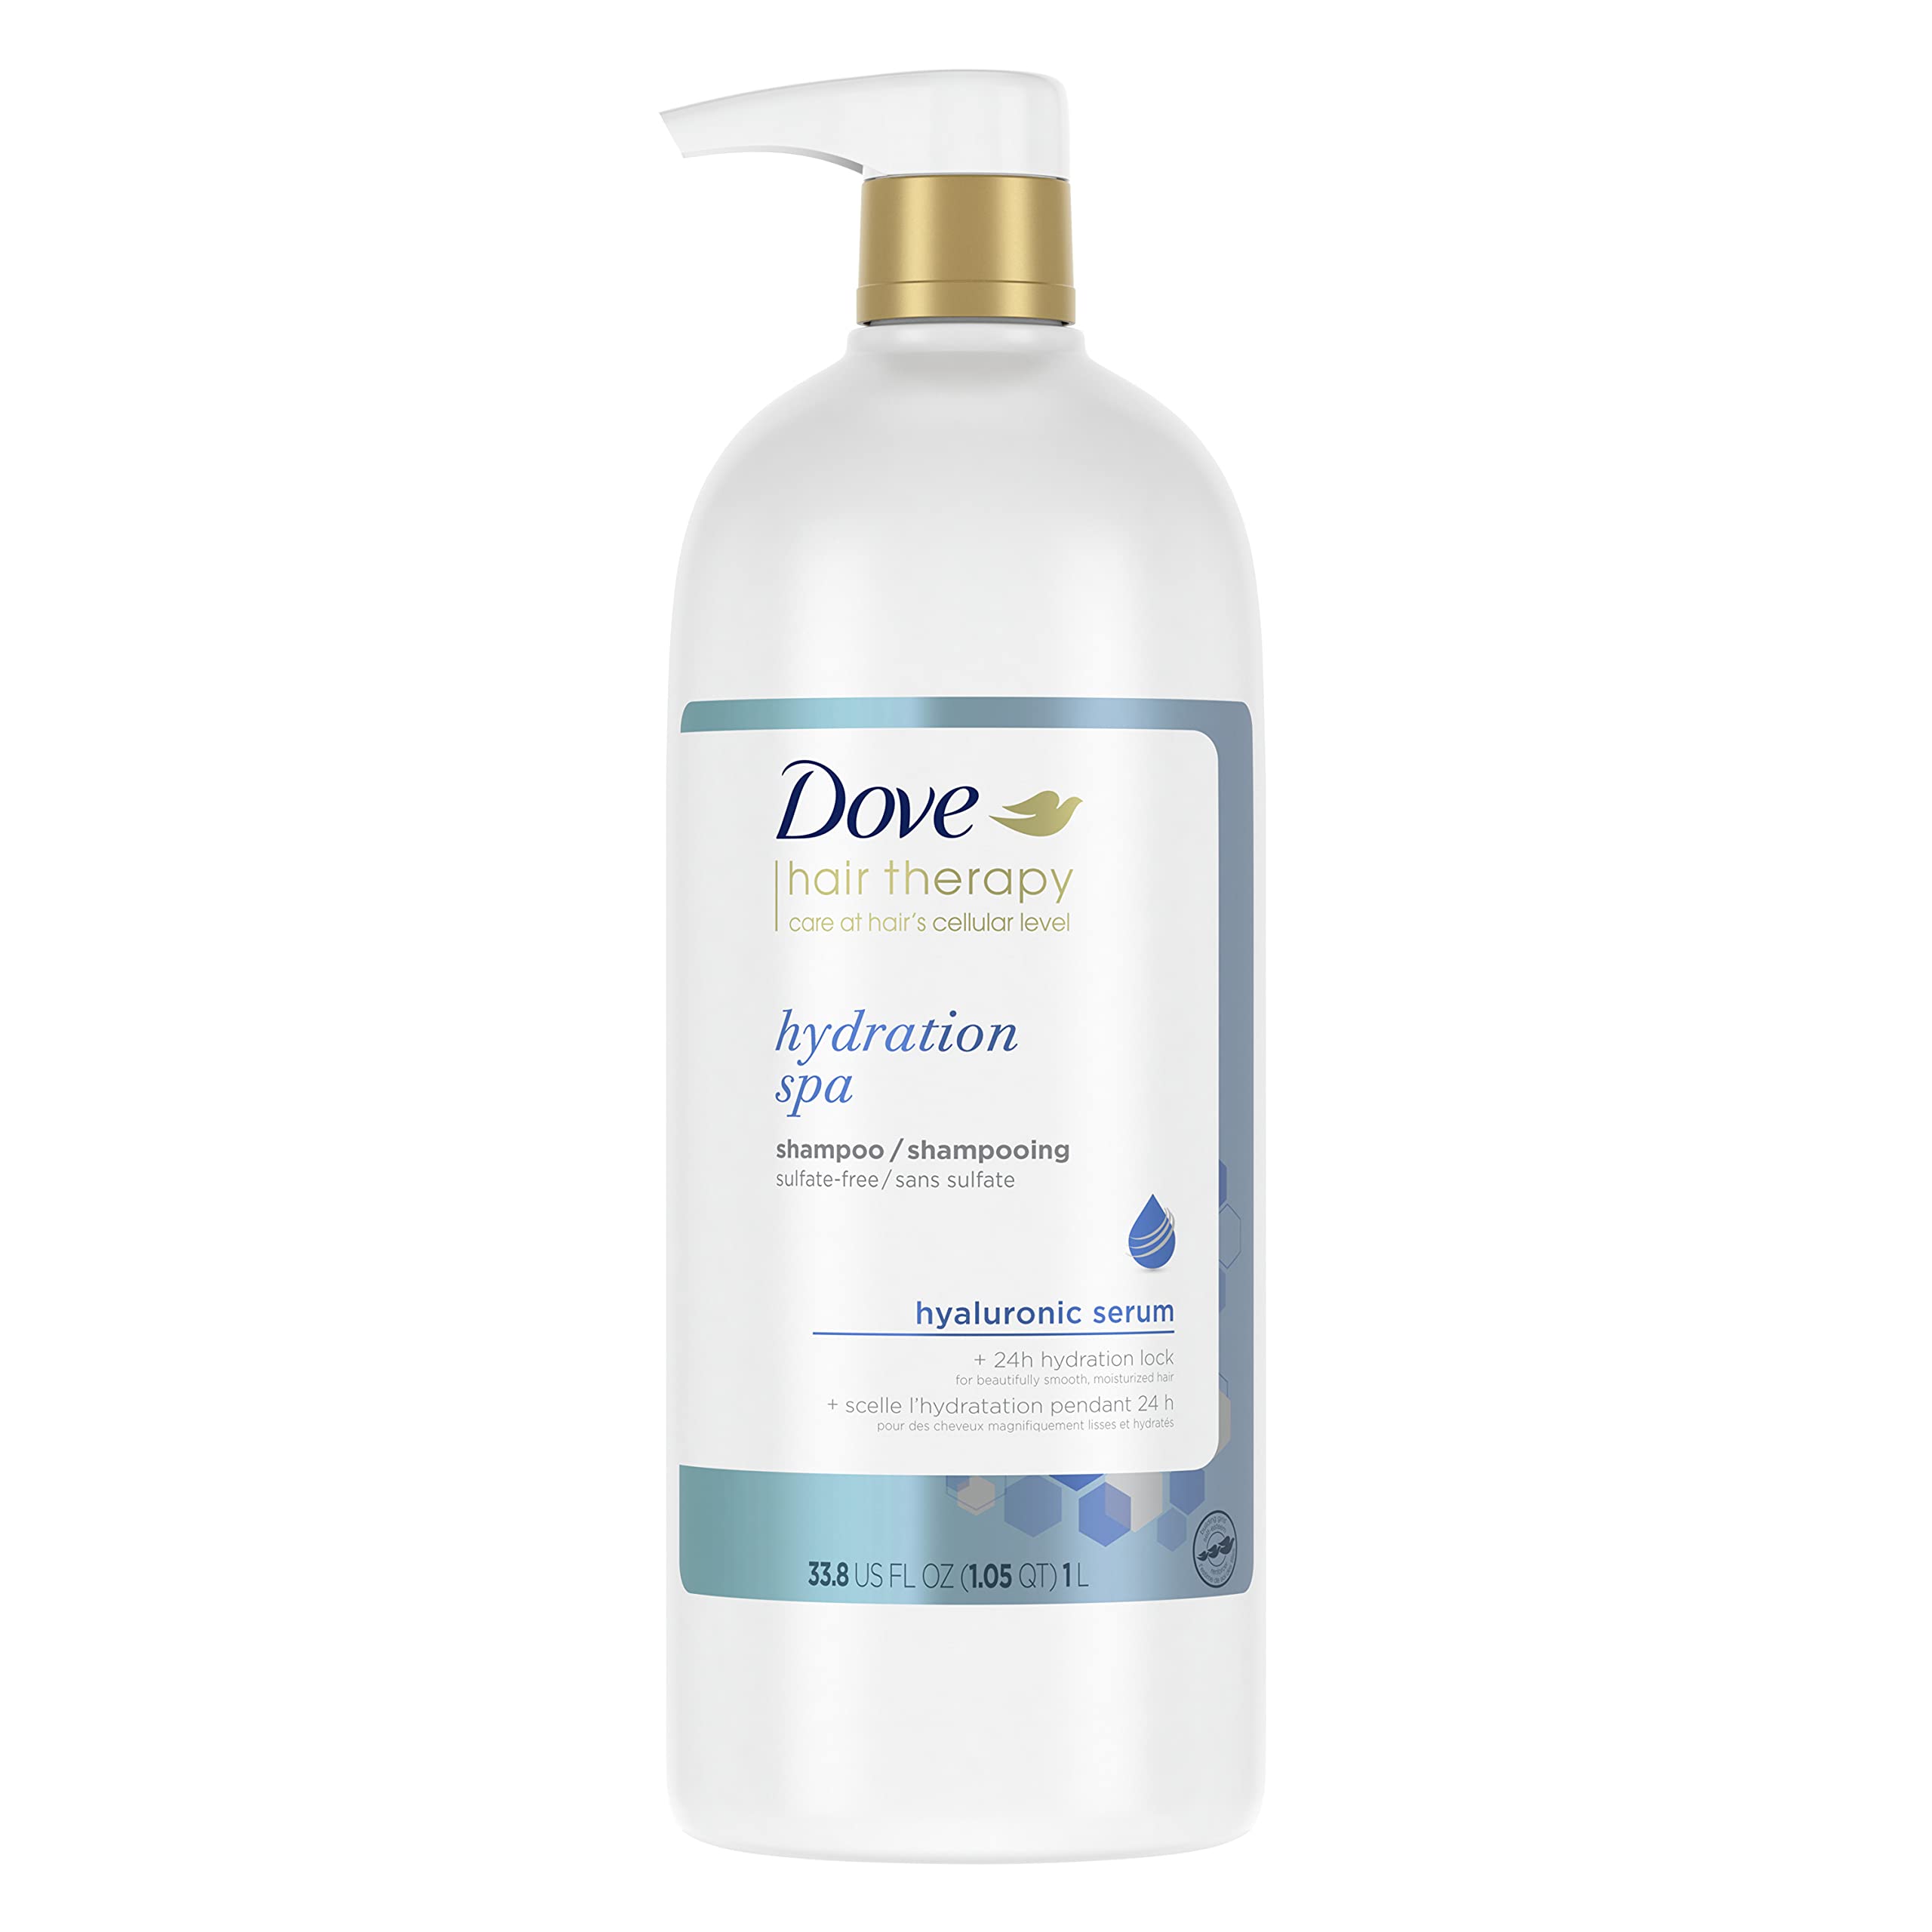 Dove Shampoo Hydration Spa for Dry Hair Hair Shampoo with Hyaluronic Serum 33.8 oz